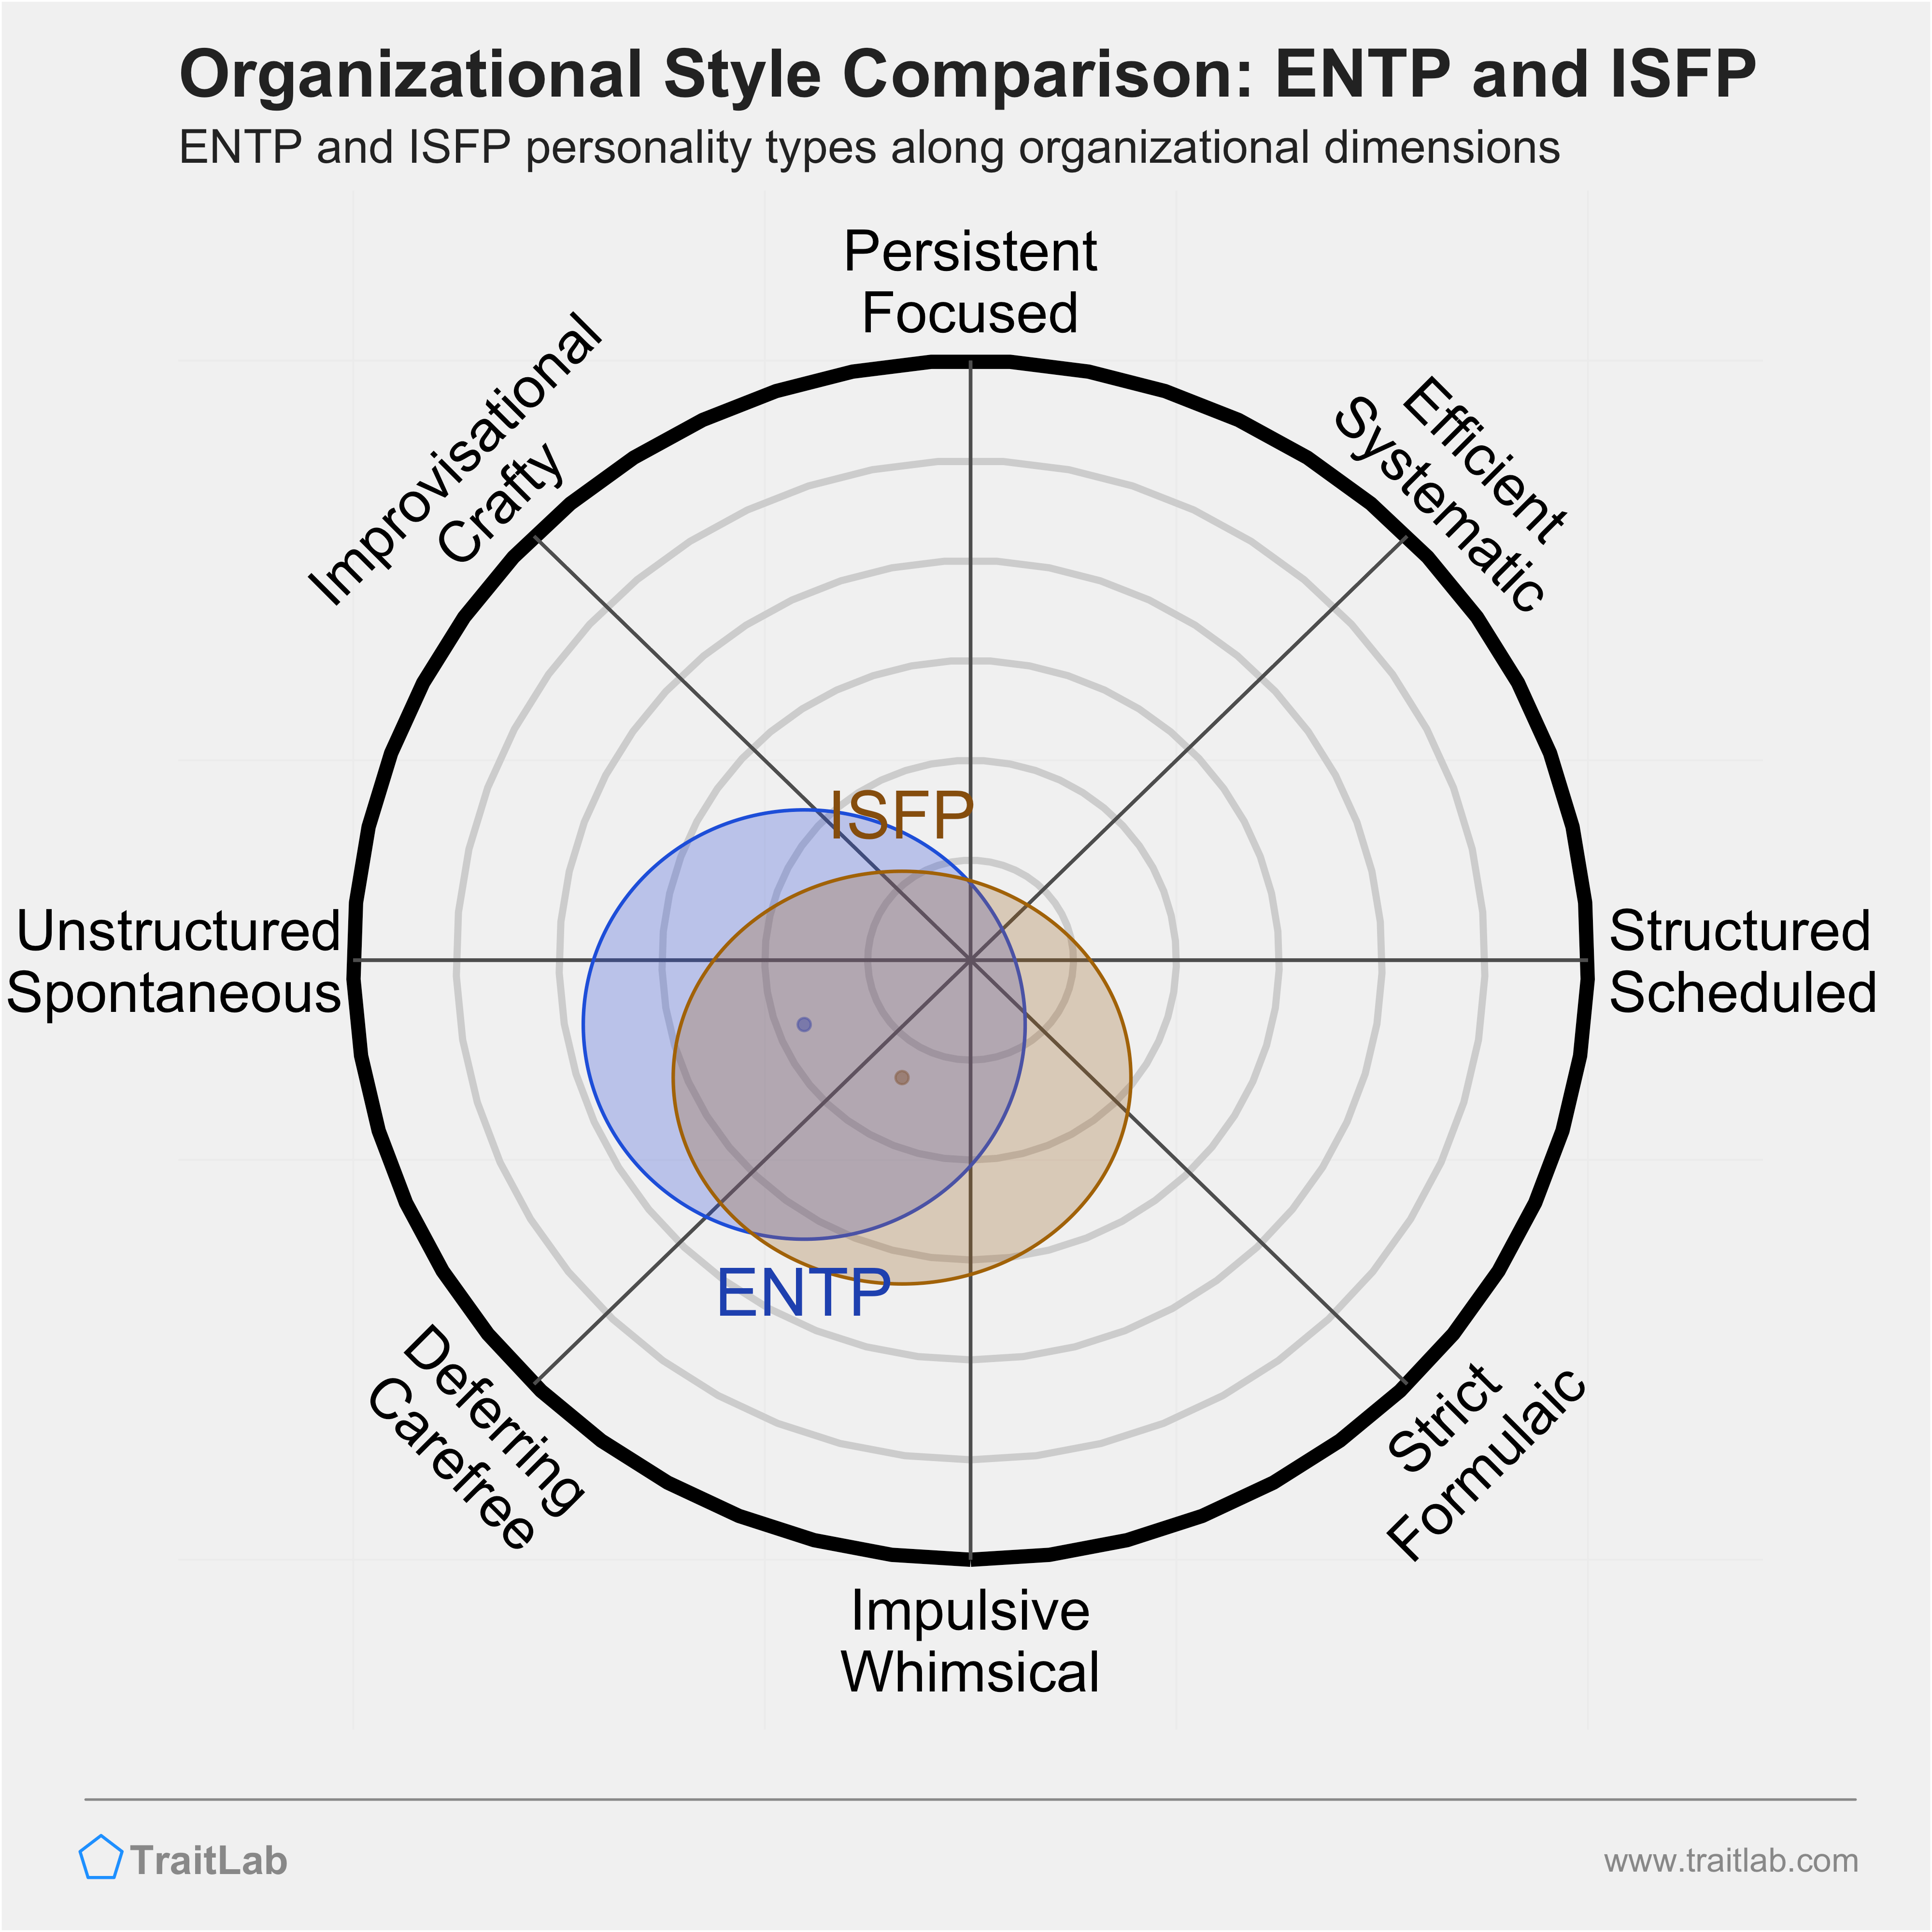 ENTP and ISFP comparison across organizational dimensions